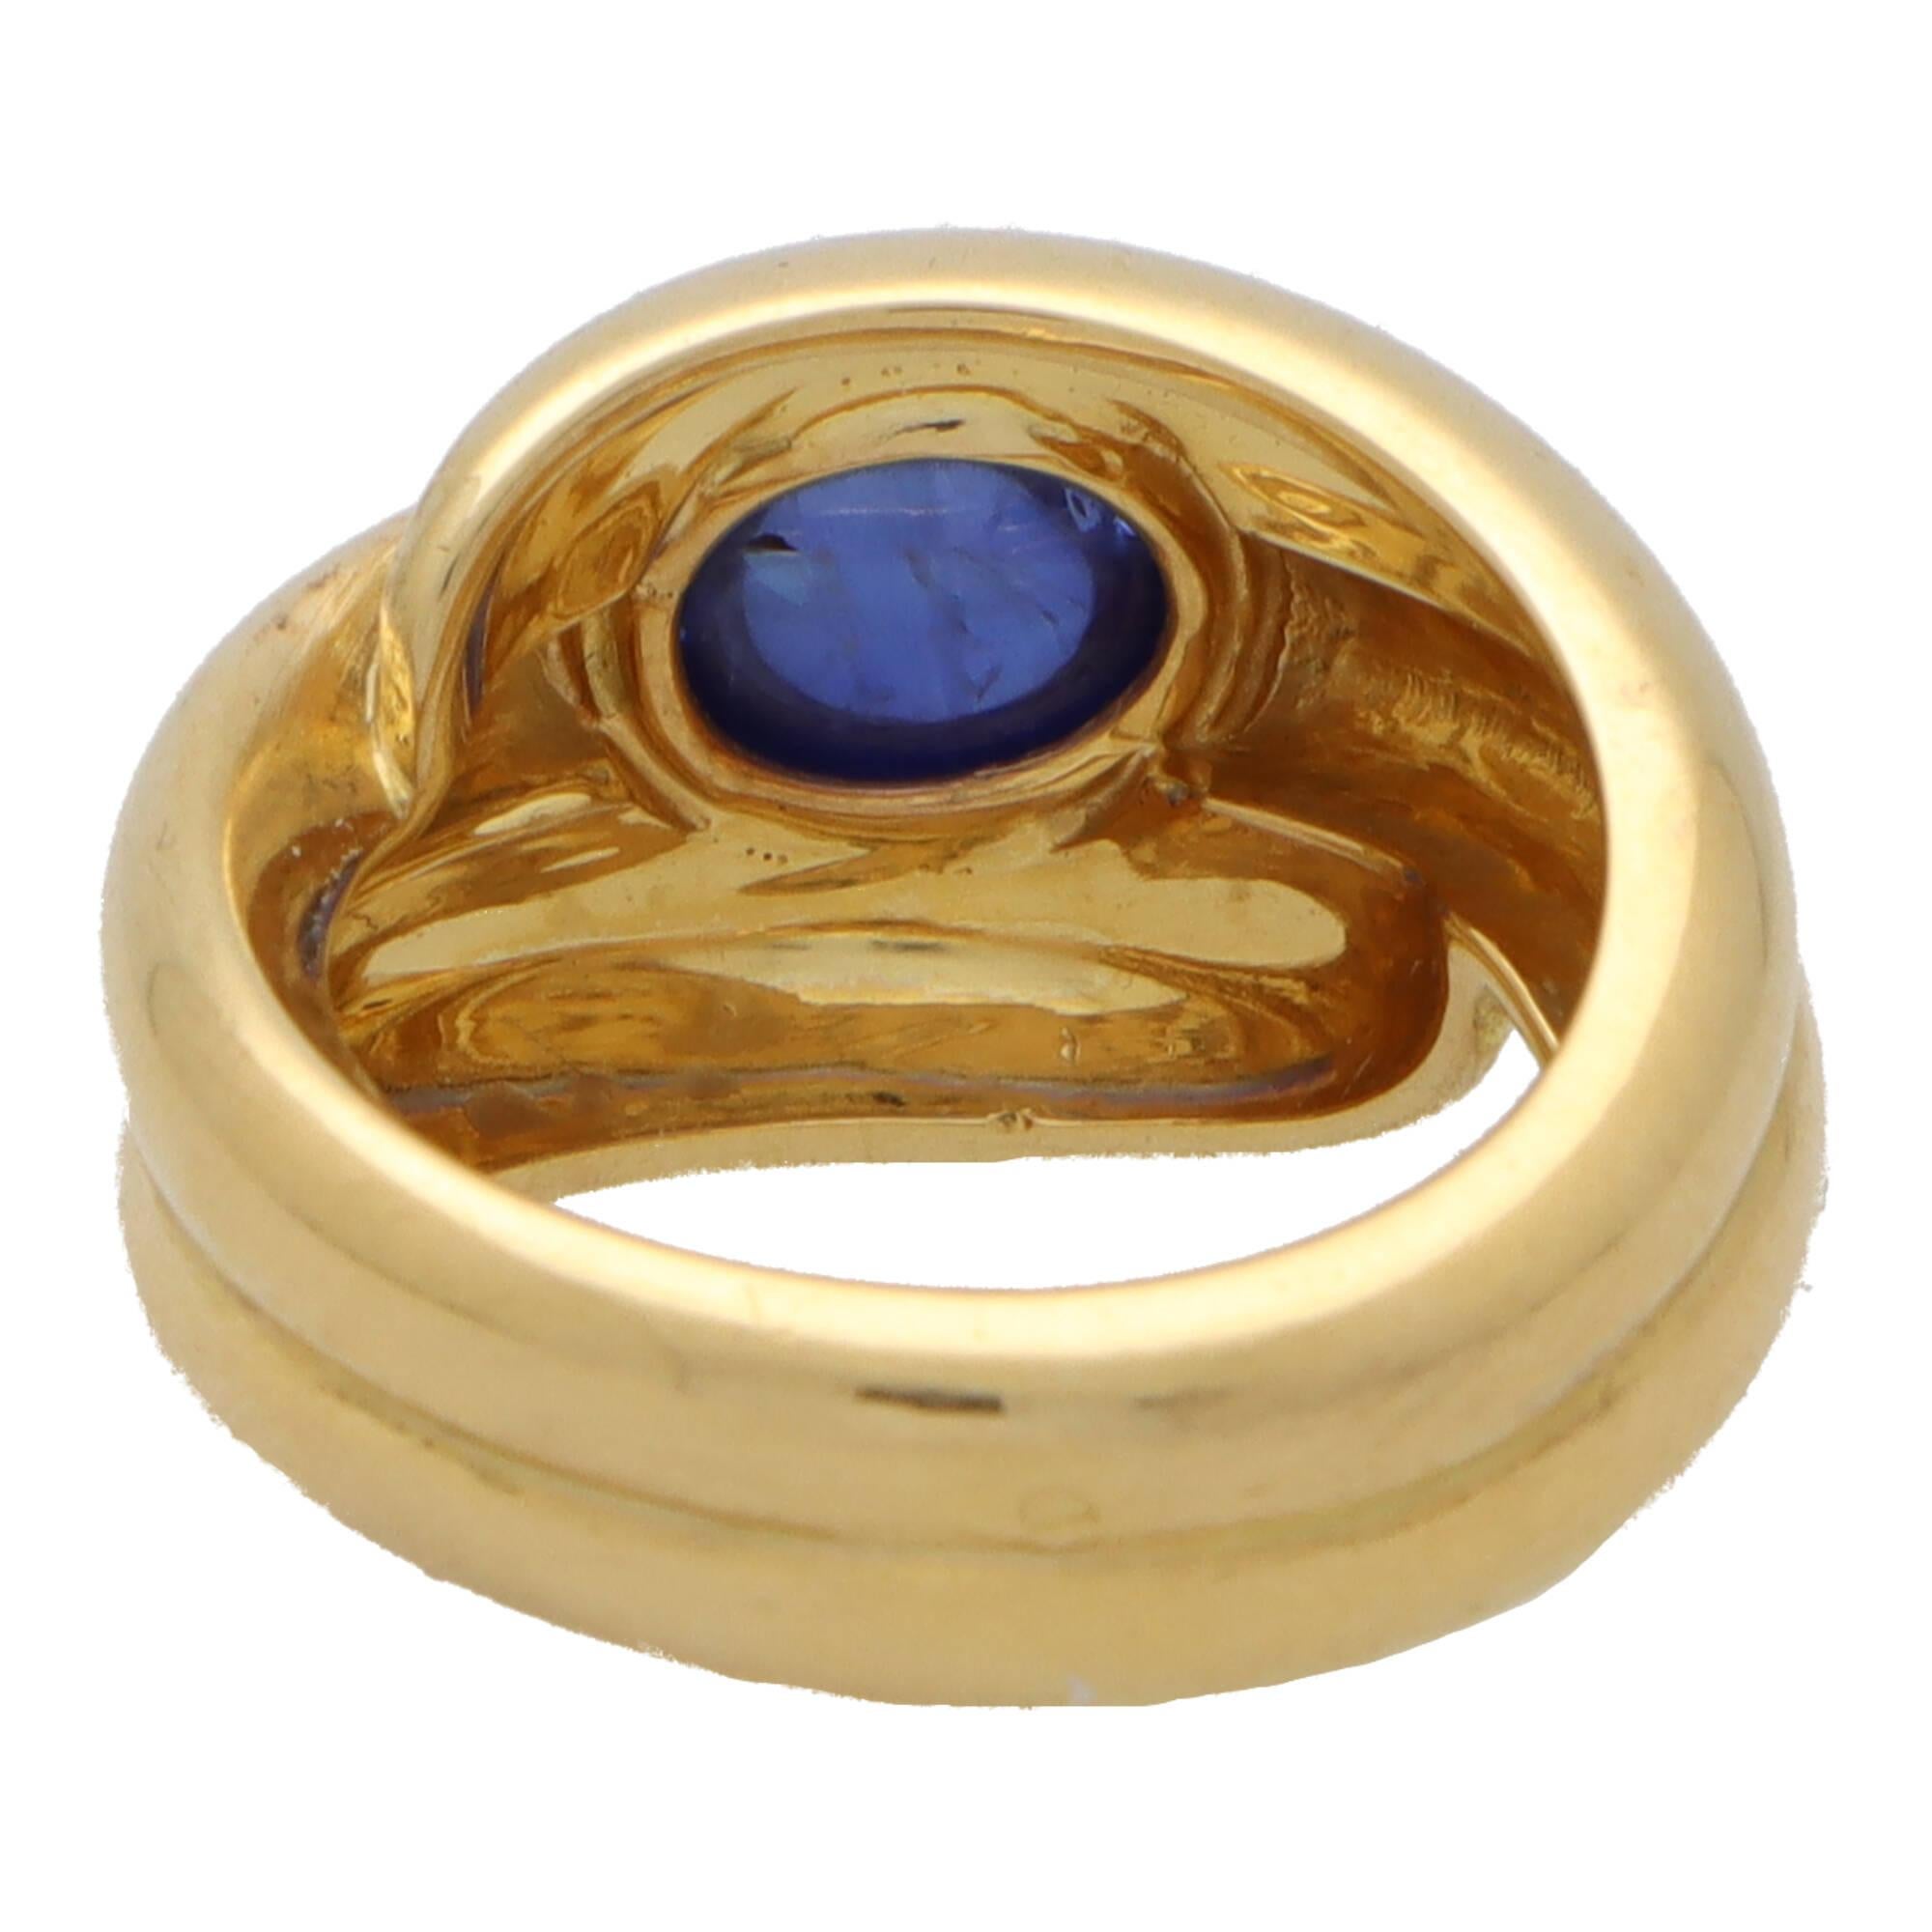 Modern Vintage French Bombé Cabochon Sapphire Ring in 18k Yellow Gold For Sale